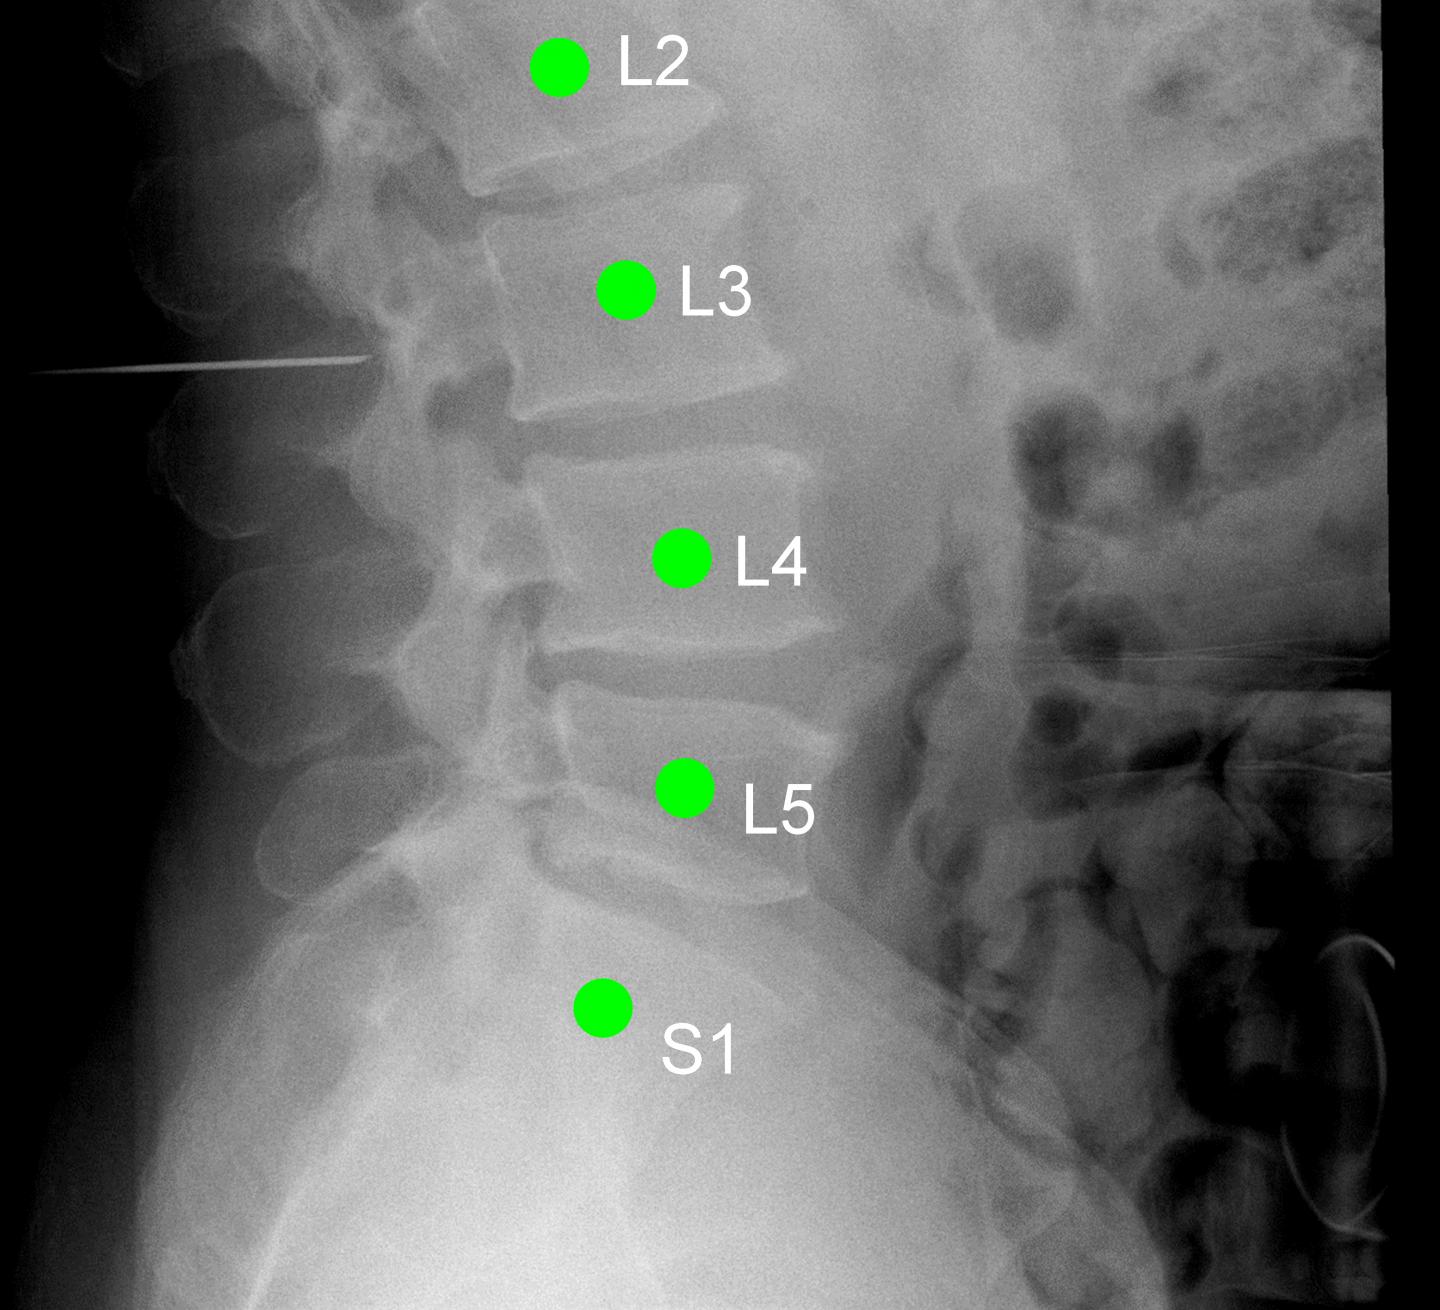 New Software Labels Patients' Vertebrae before Spine Surgery